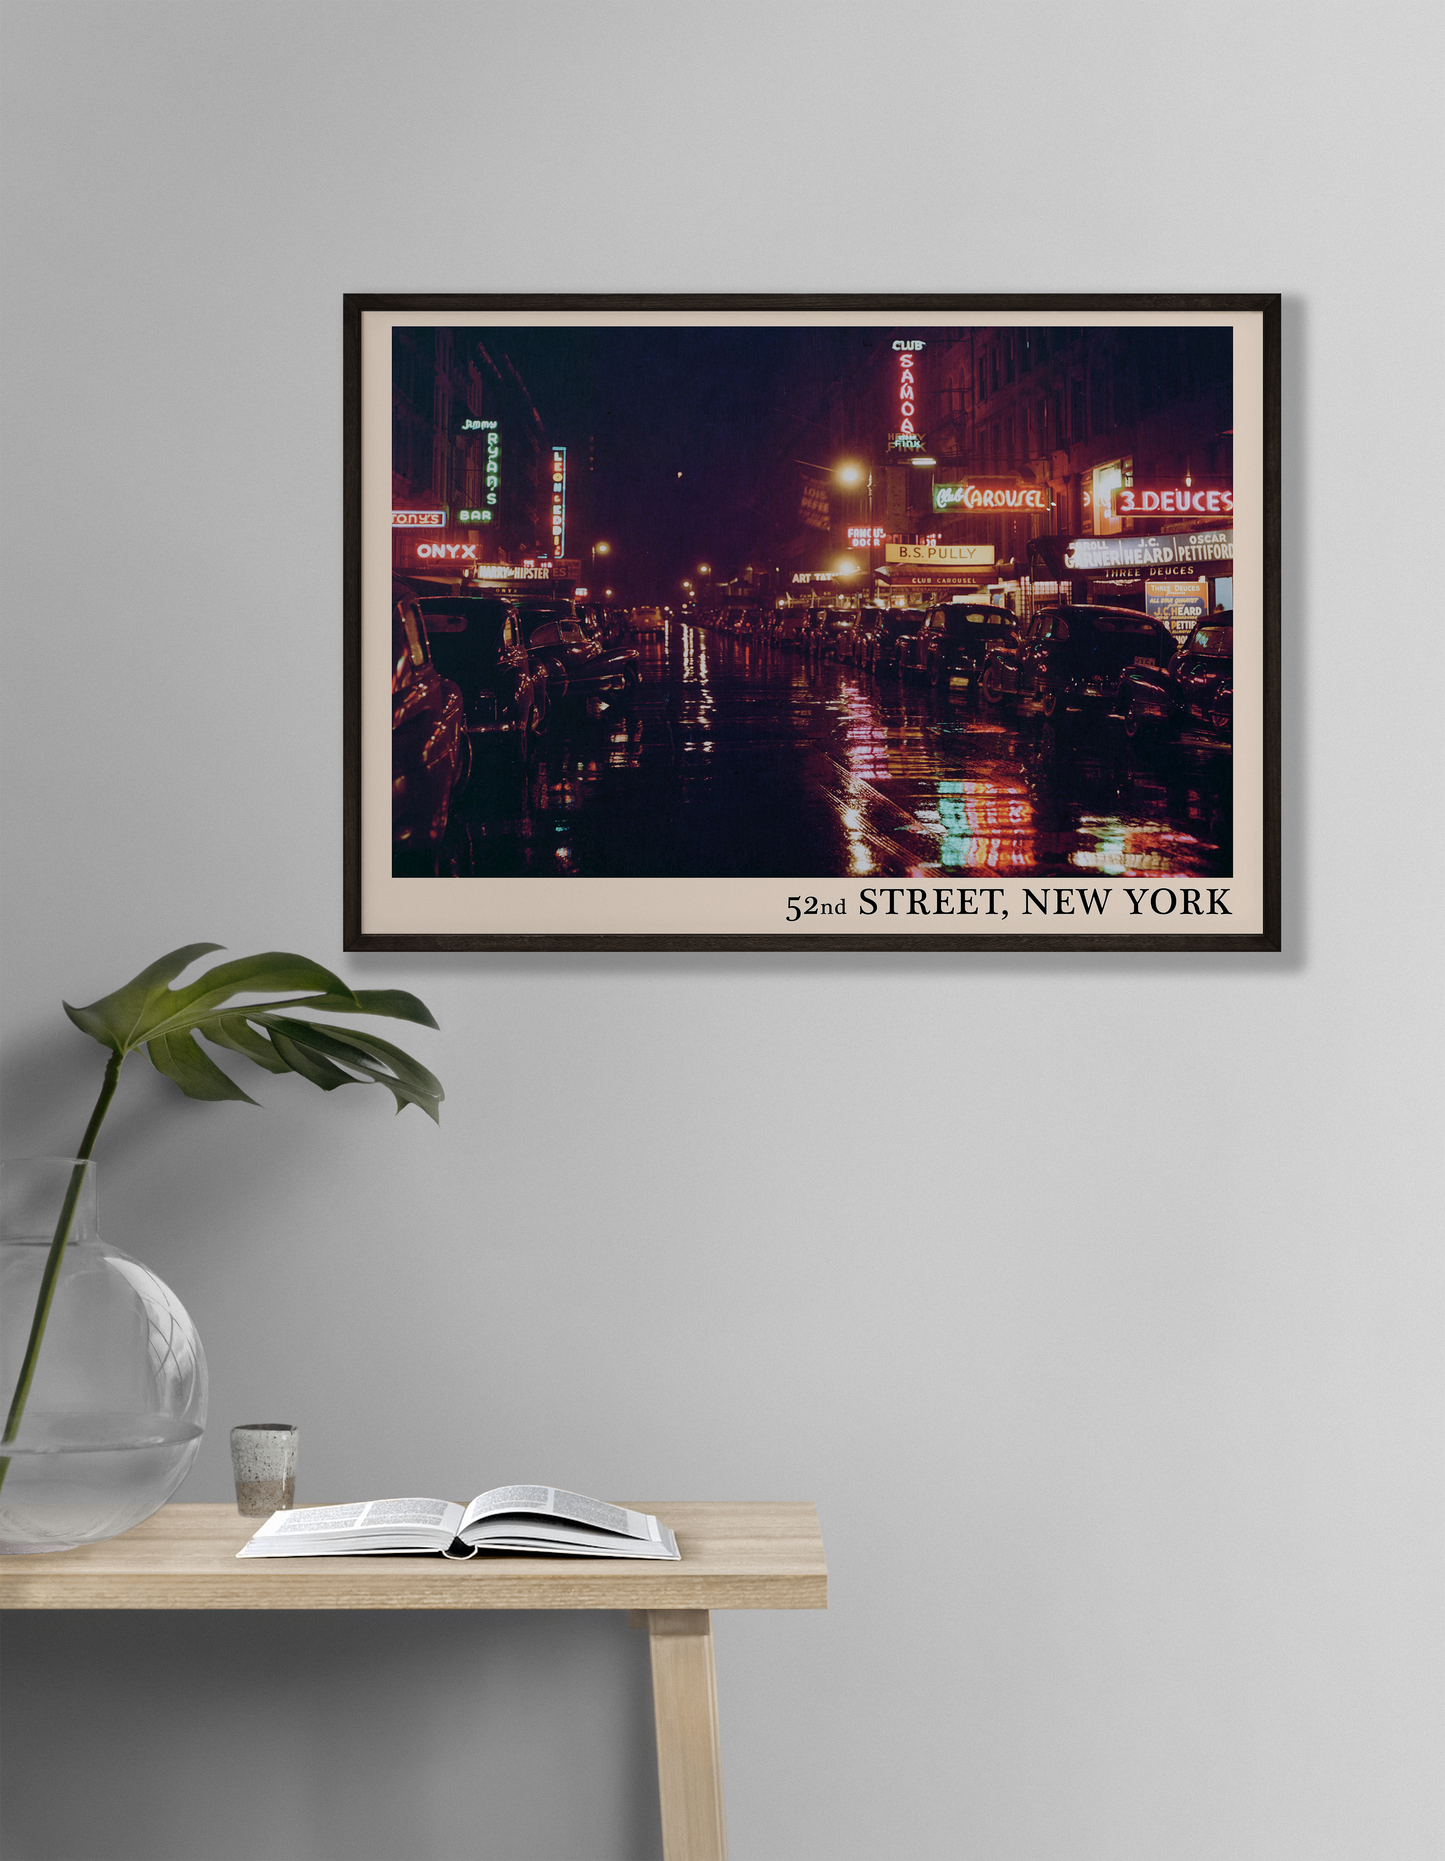 Iconic 52nd Street in New York captured in a retro black framed jazz venue print, hanging on a grey living room wall